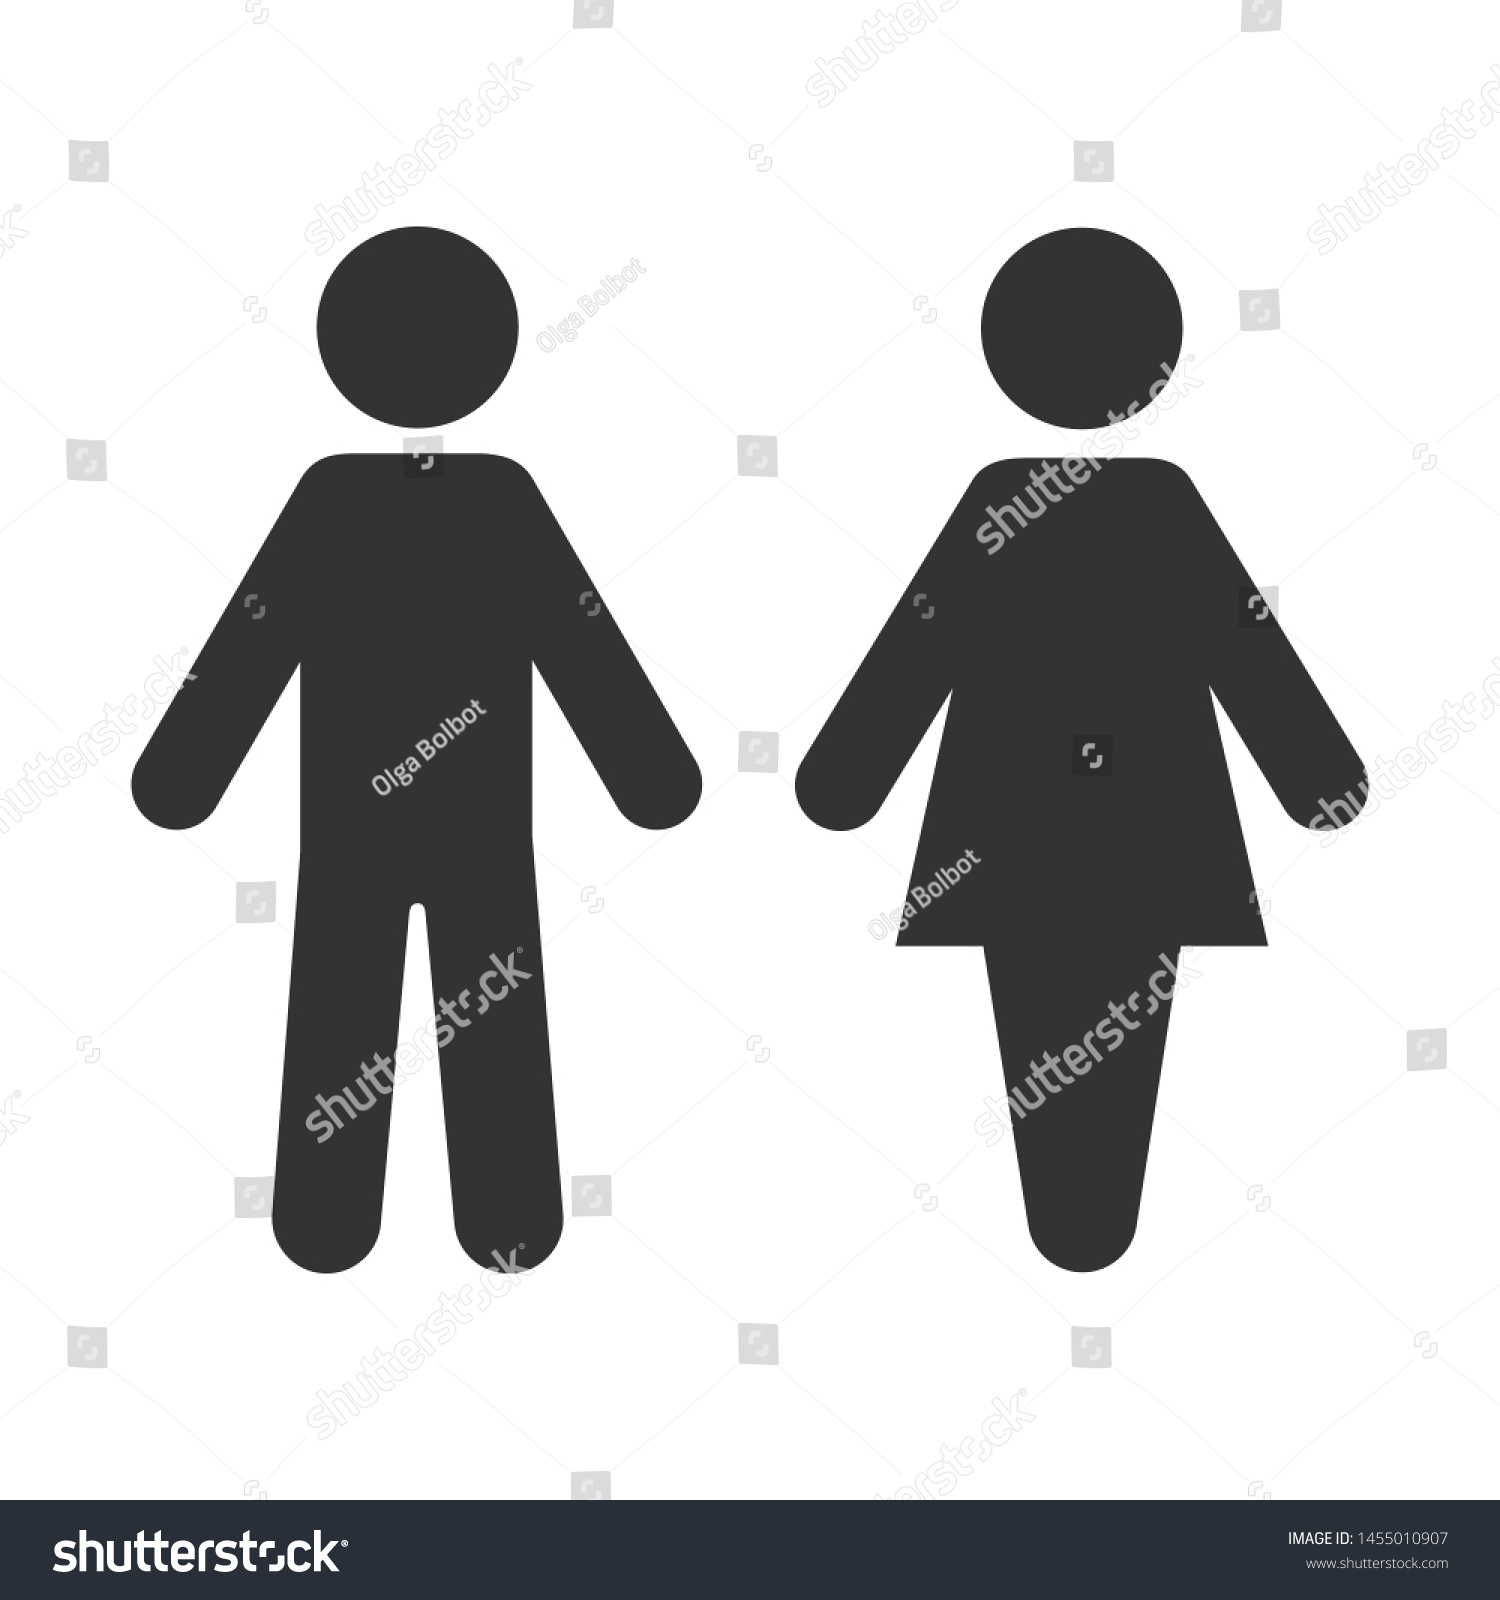 Icon toilet. Restroom sign. Male and female bathroom sign. Black abstract symbols of man and women in flat style isolated on white background. Vector illustration. #1455010907